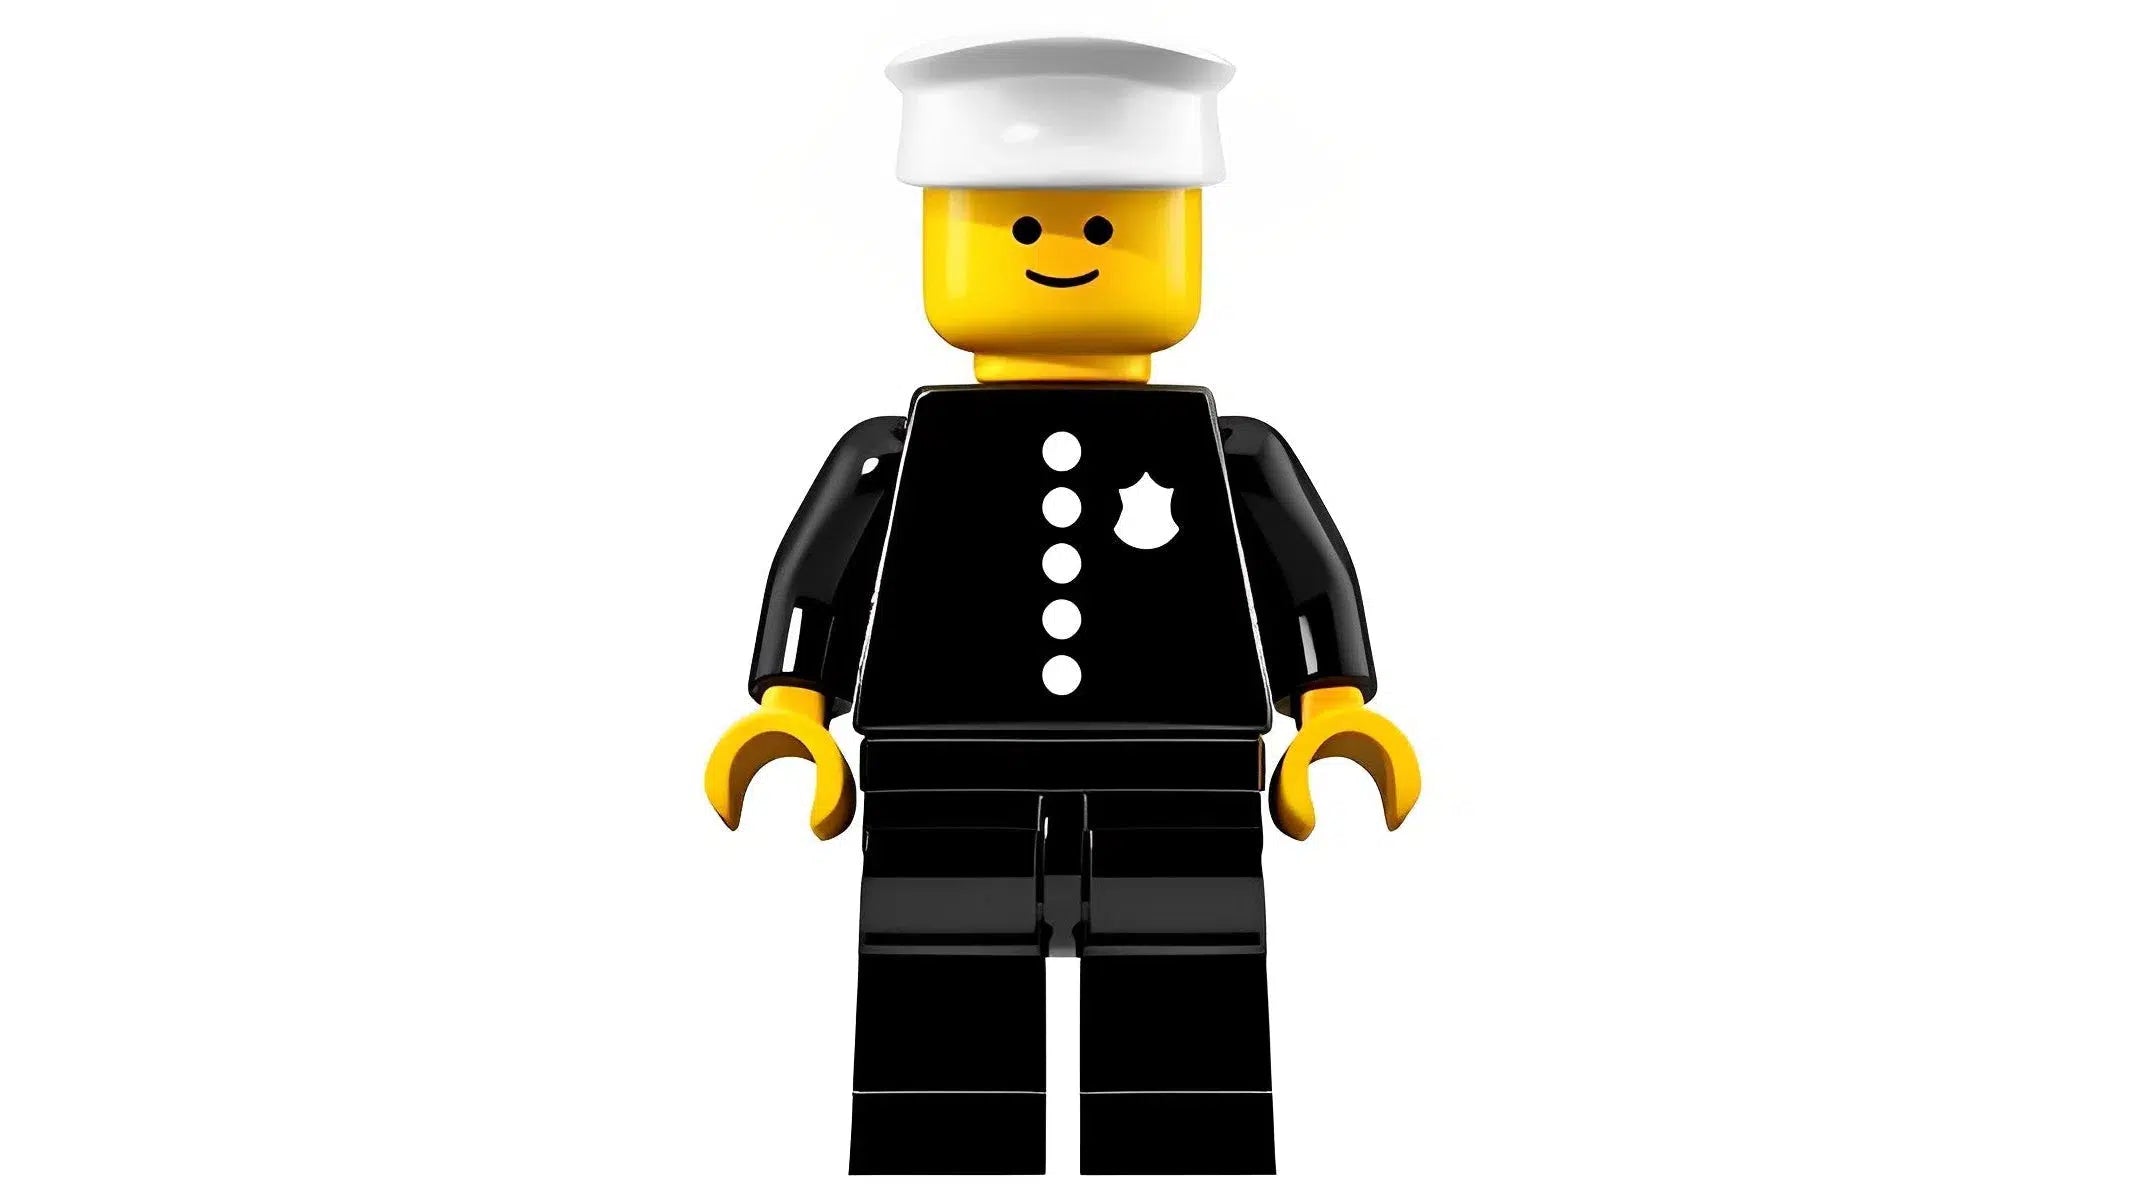 The First LEGO Minifigure: A Look Back at the Police Officer Figure